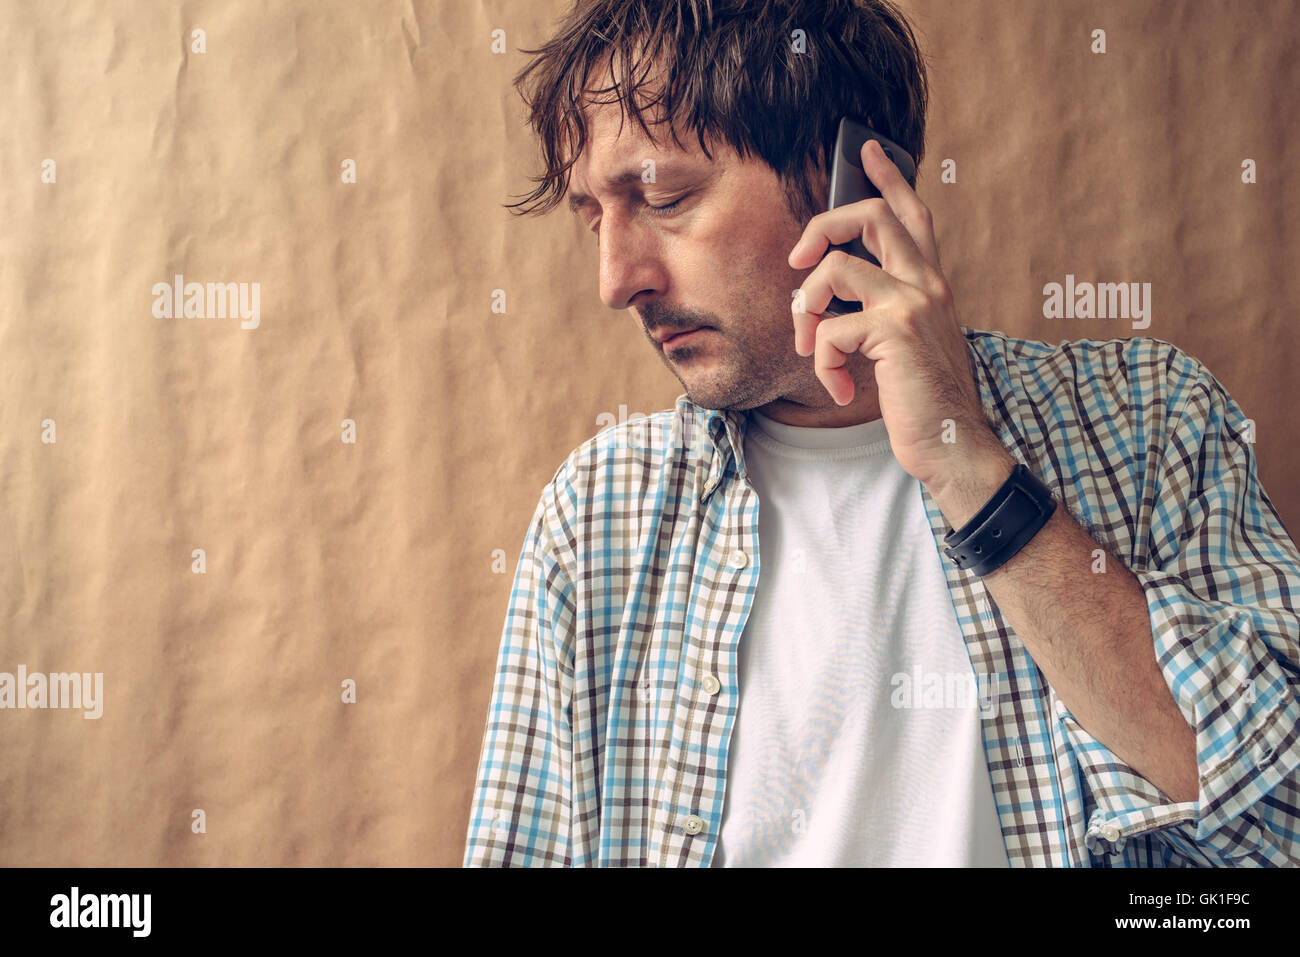 Man hearing bad news on the phone, adult caucasian male using mobile telephone device Stock Photo